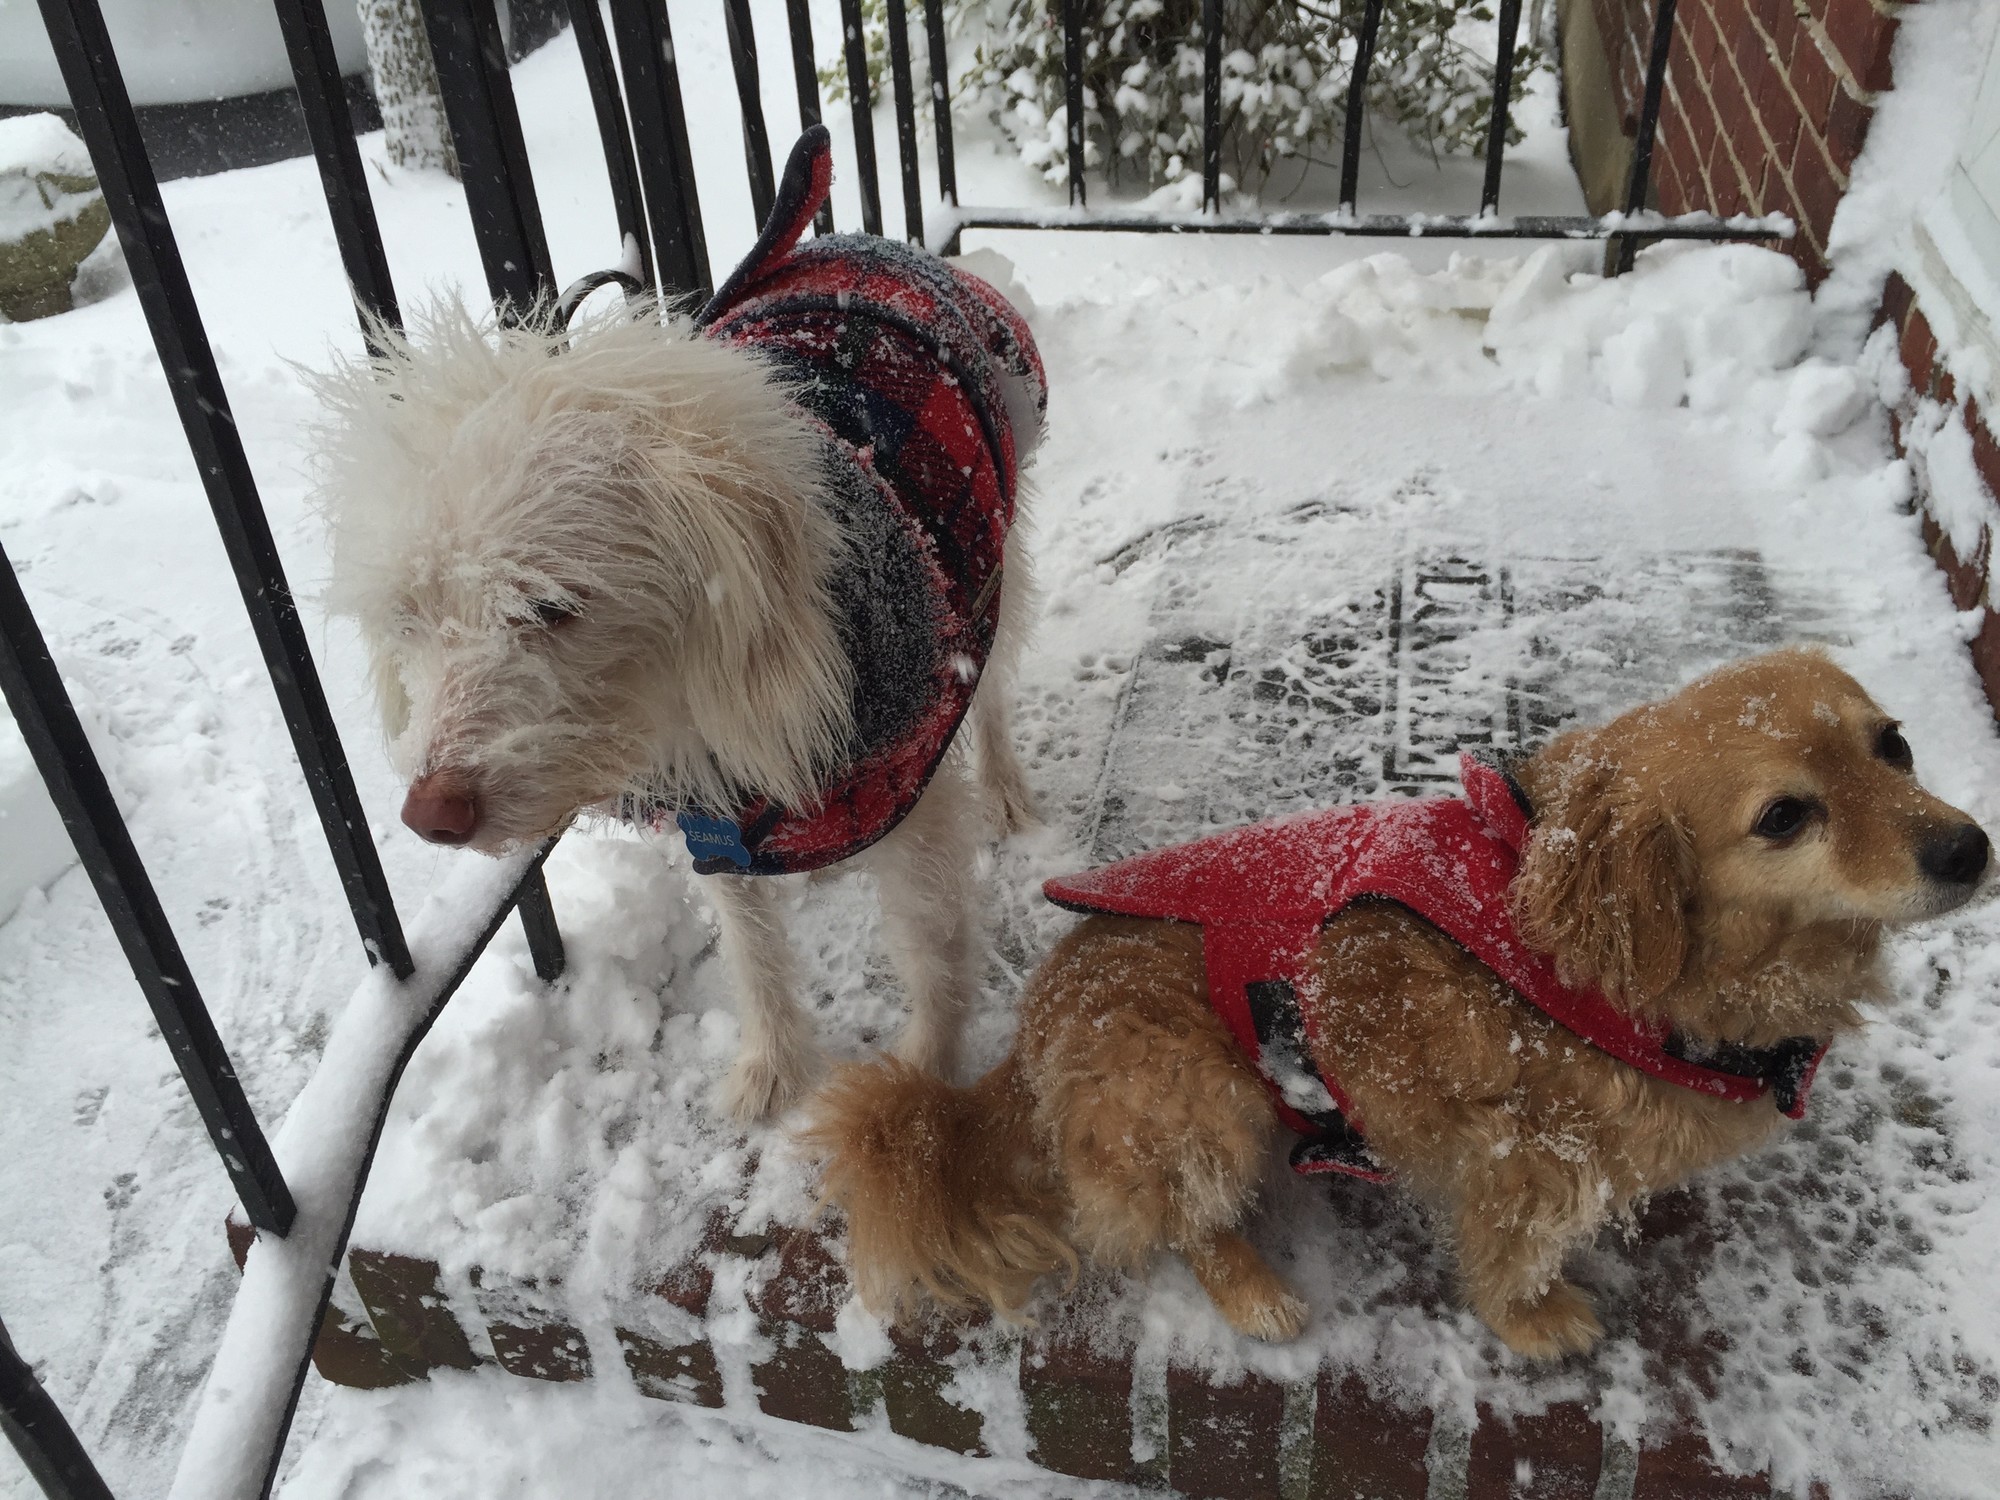 Seamus and Chloe were dressed for the blizzard outside their home on Merton Avenue in Lynbrook.